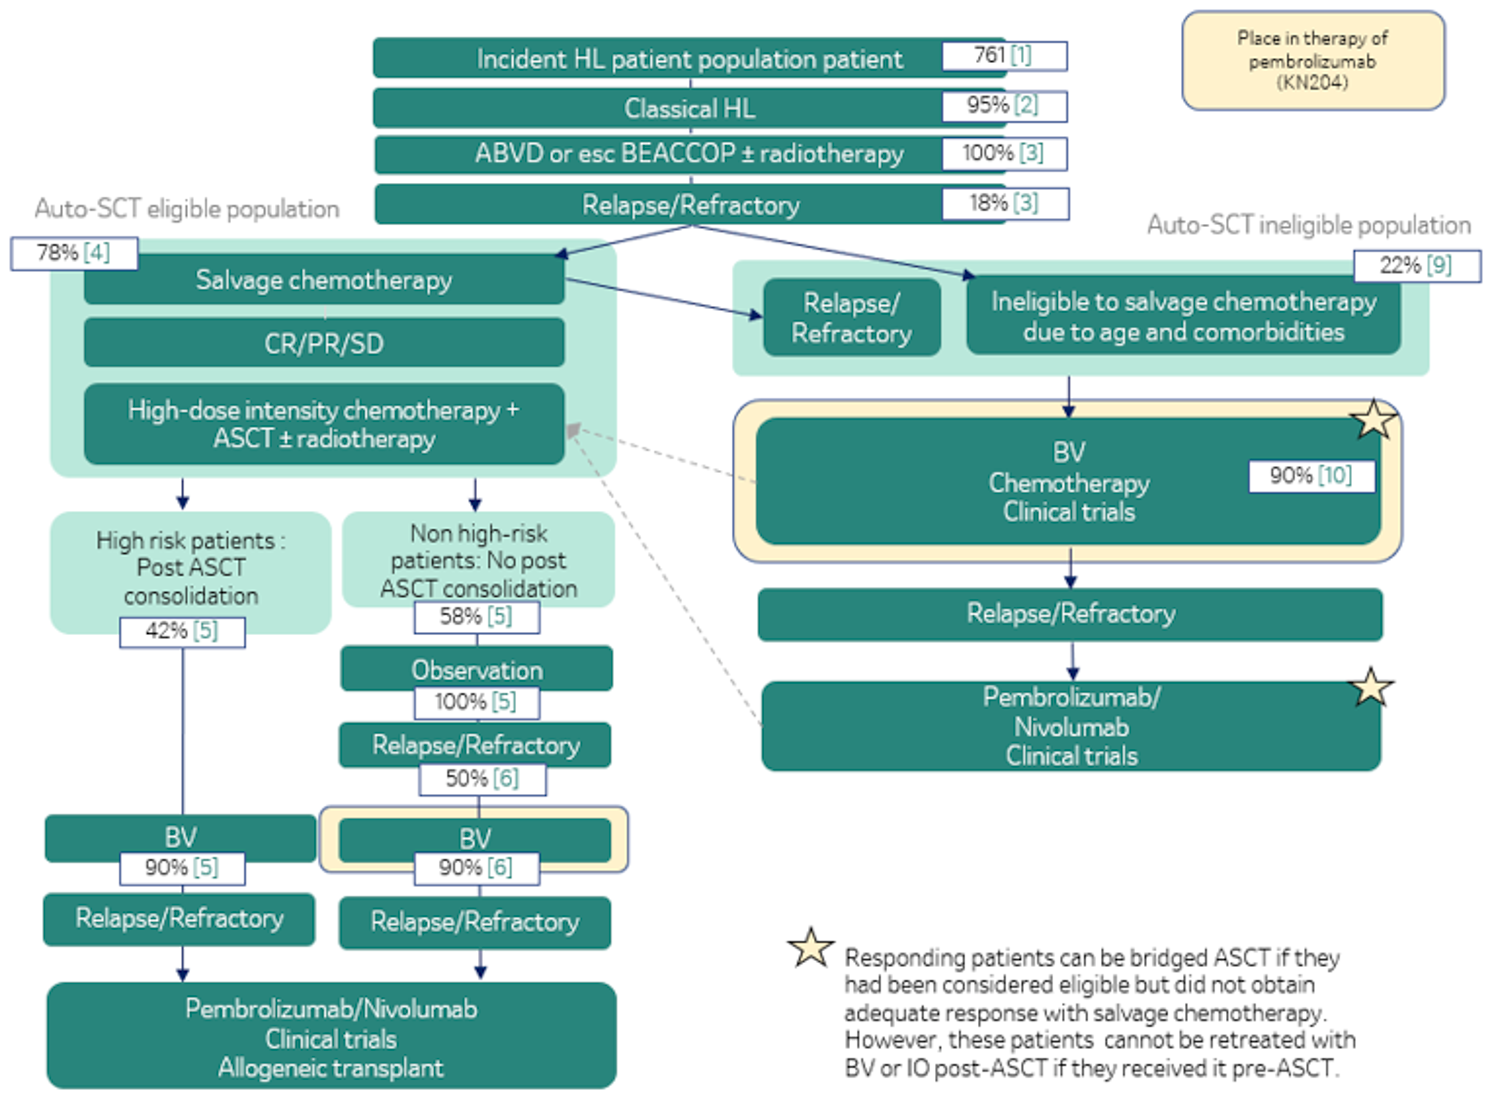 A flowchart showing how the population size eligible for treatment with pembrolizumab in the submitted indication was derived.